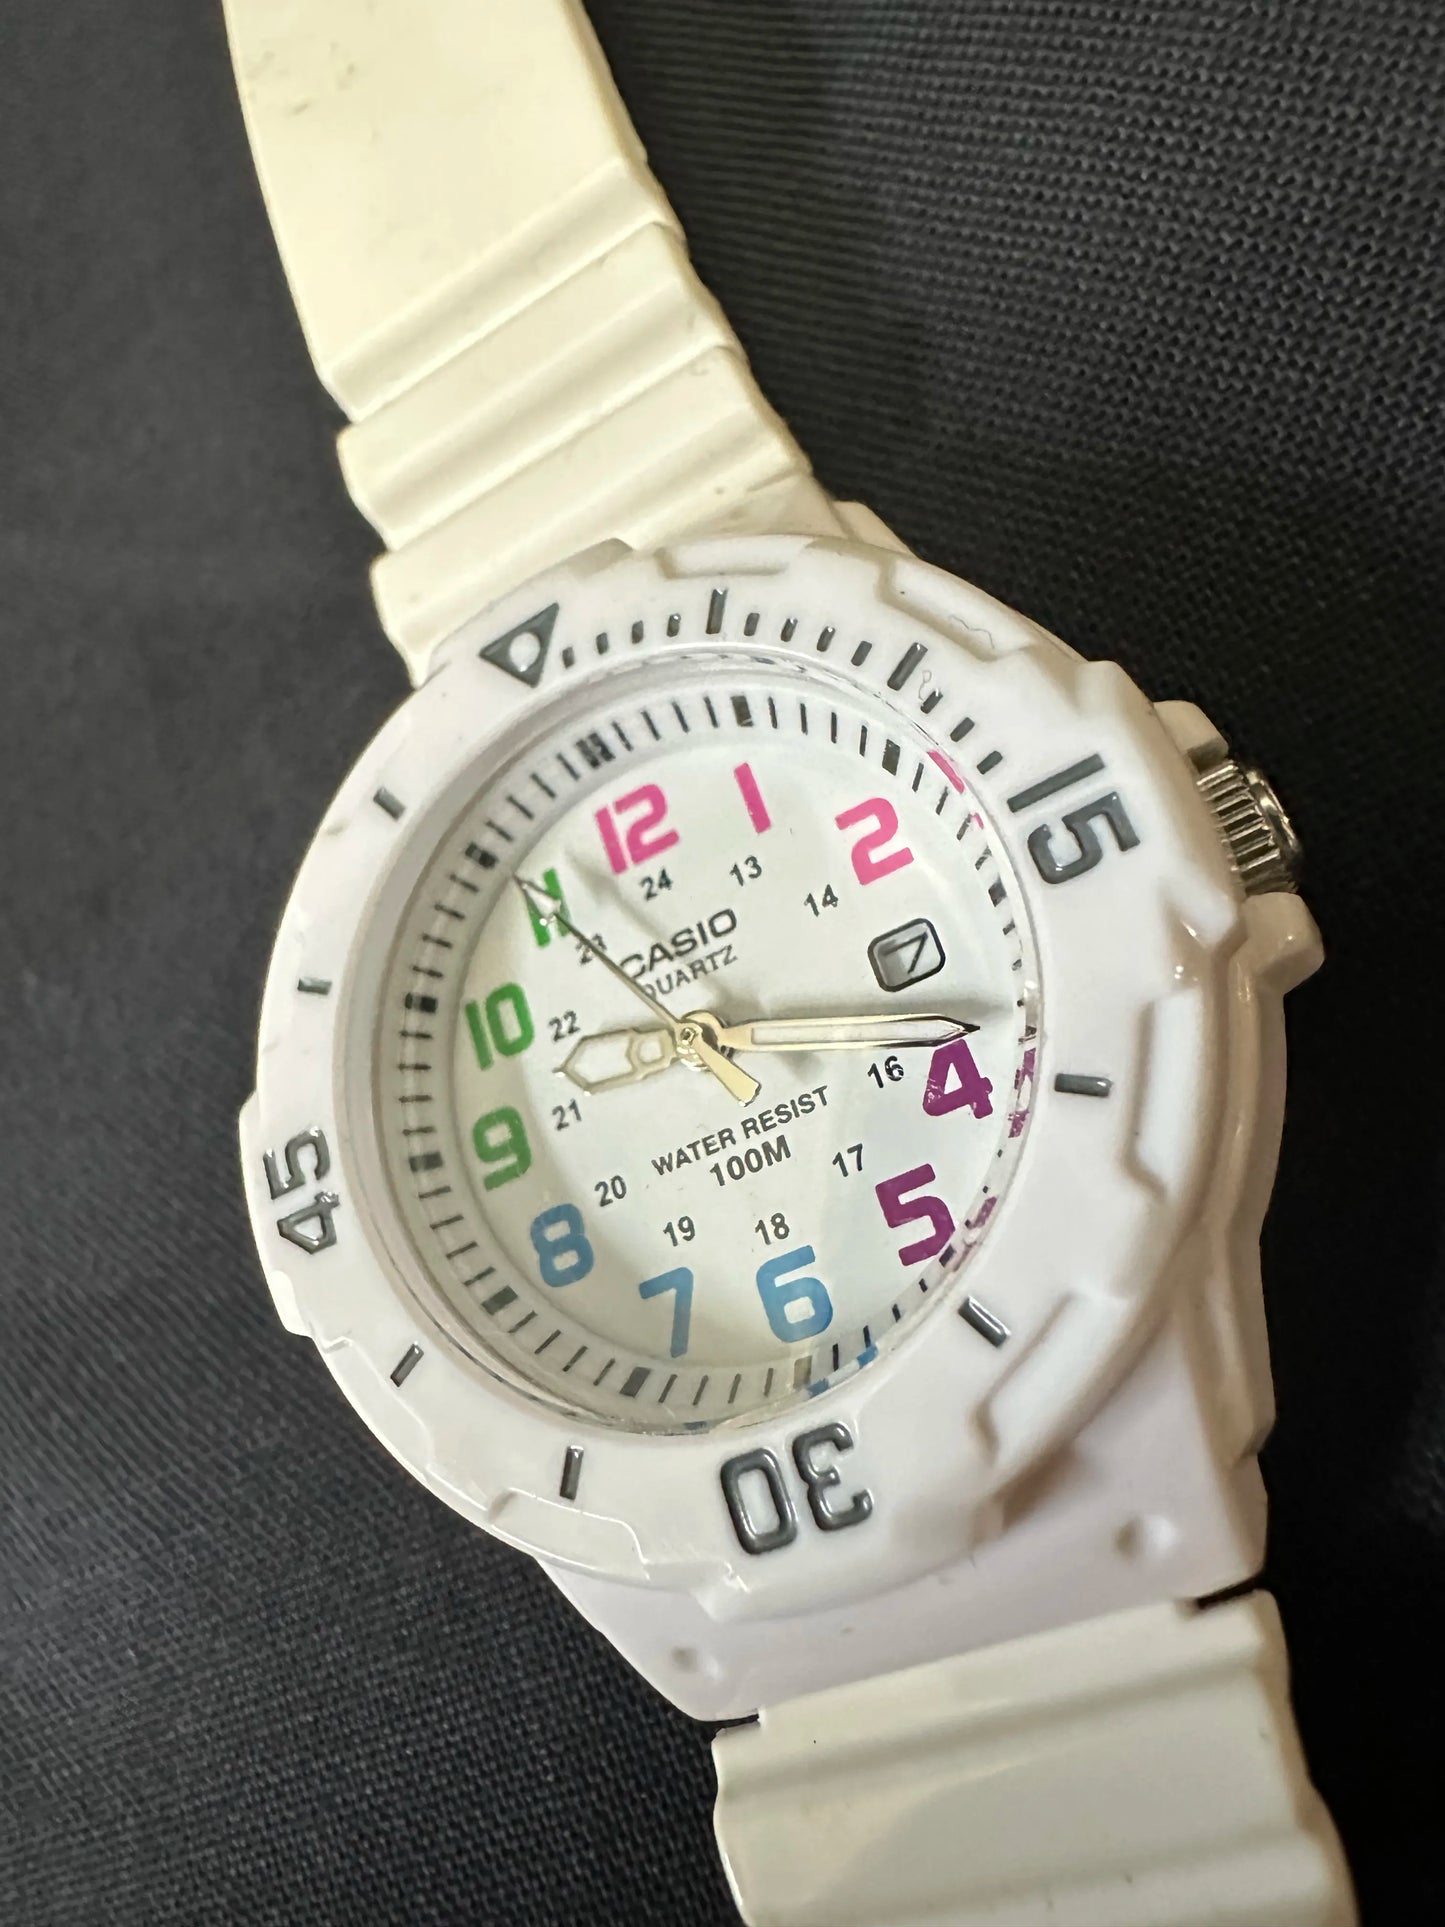 Casio white ladies watch, with colored numbers - LRW-200H